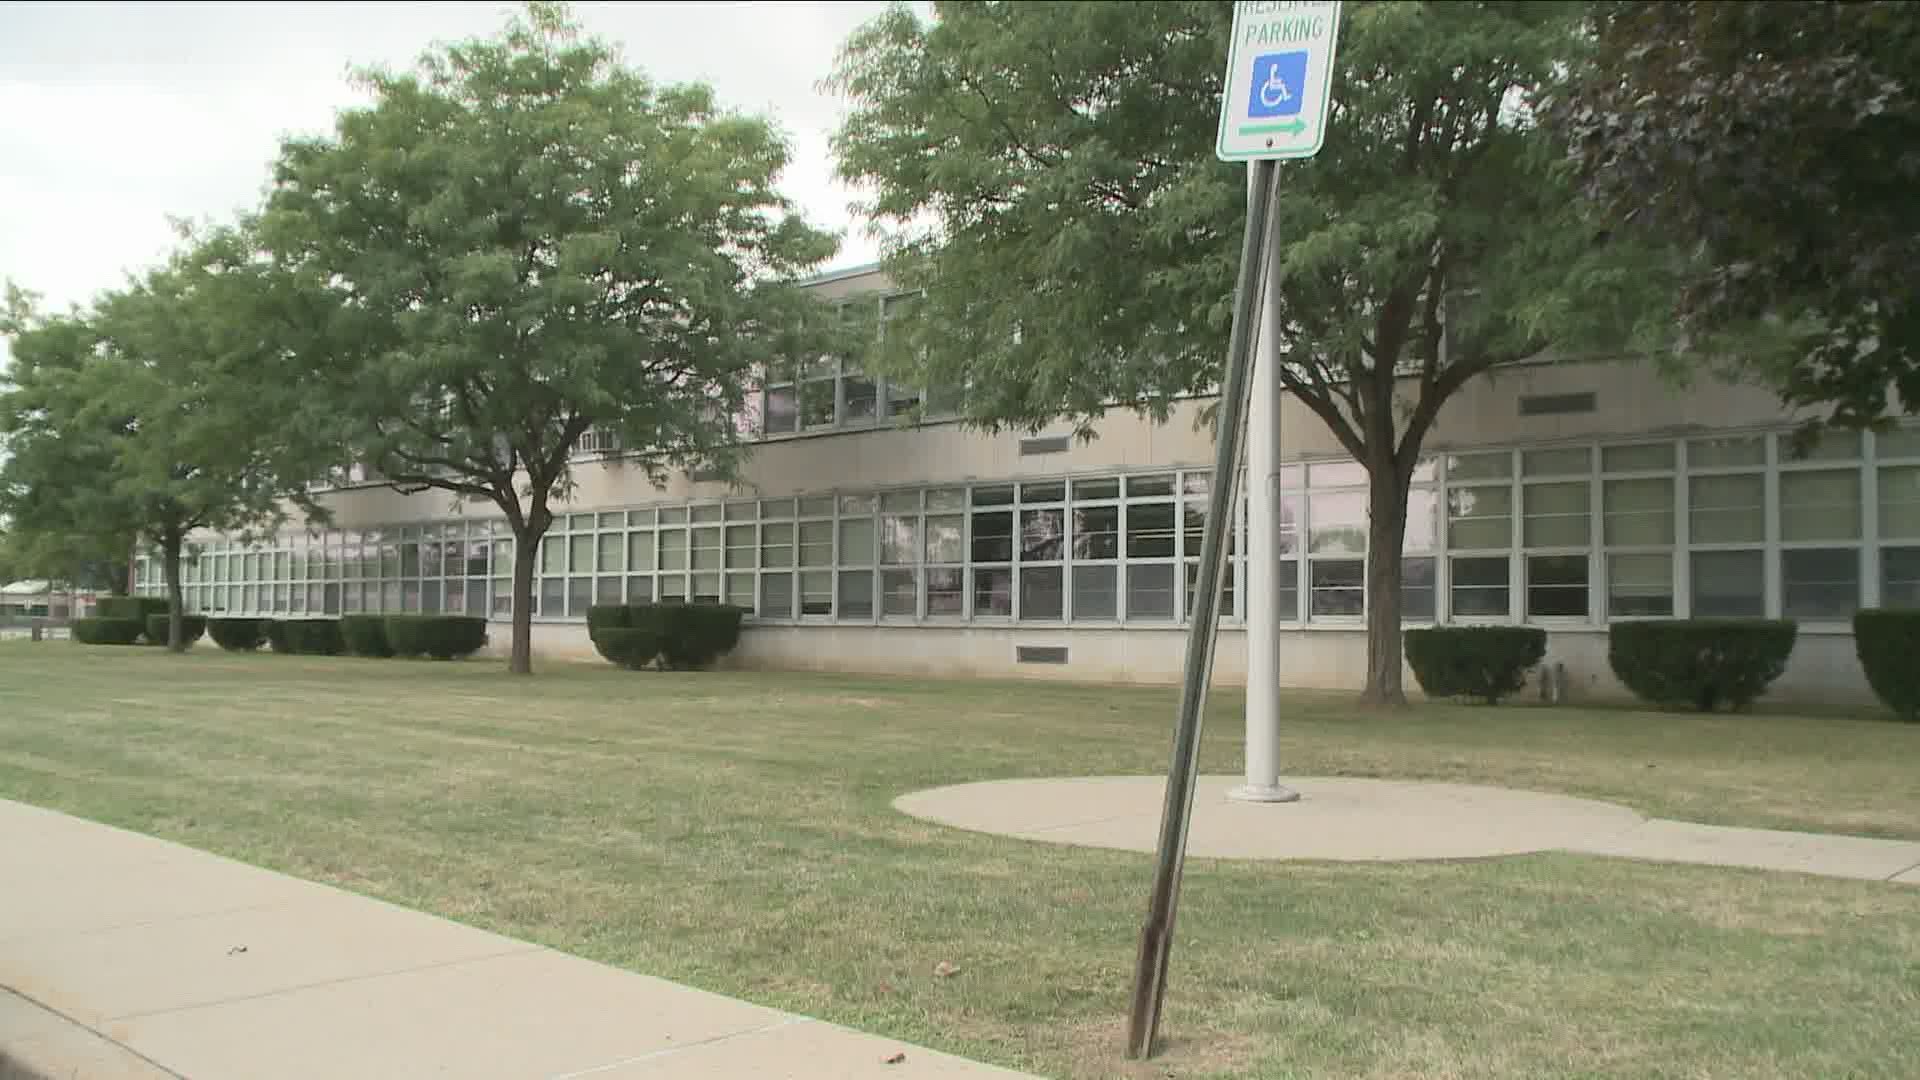 This year, Niagara Falls City School District is tackling racism head-on. And they're starting with the school's staff.